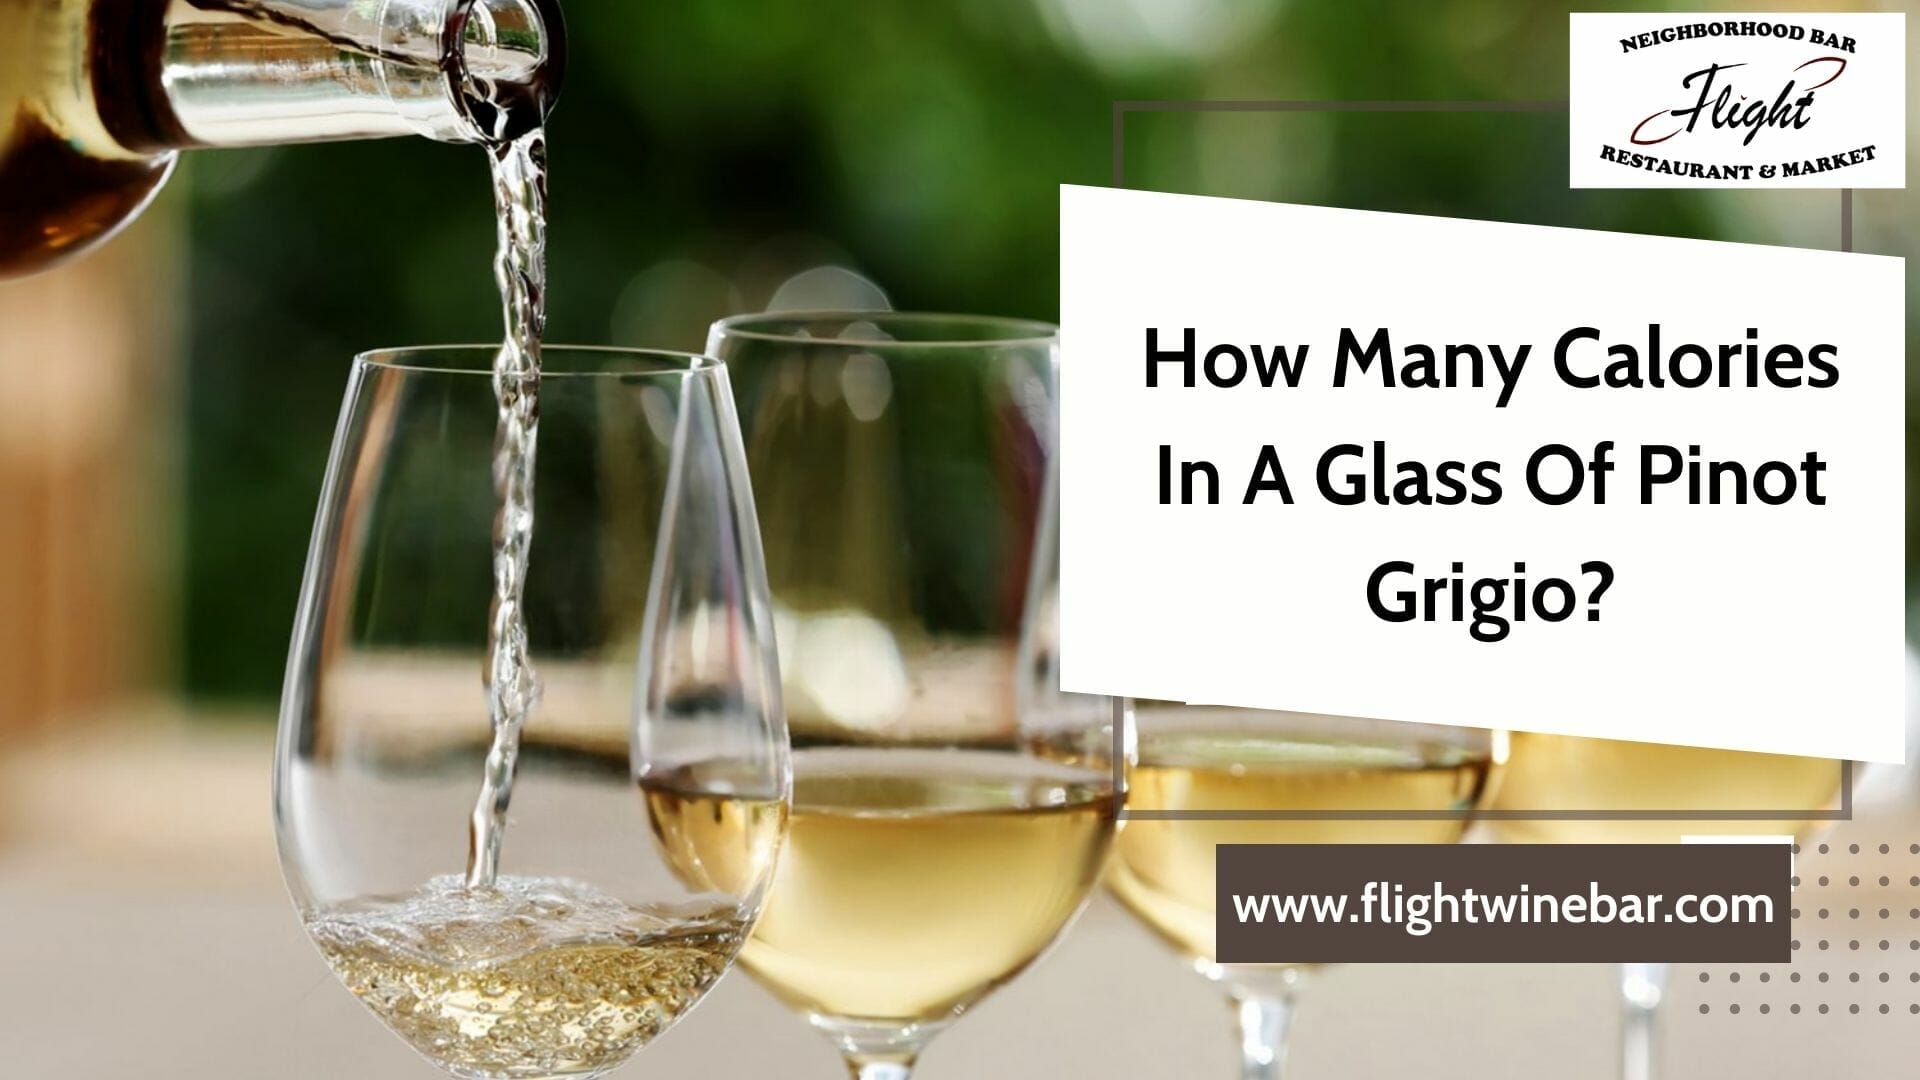 How Many Calories In A Glass Of Pinot Grigio